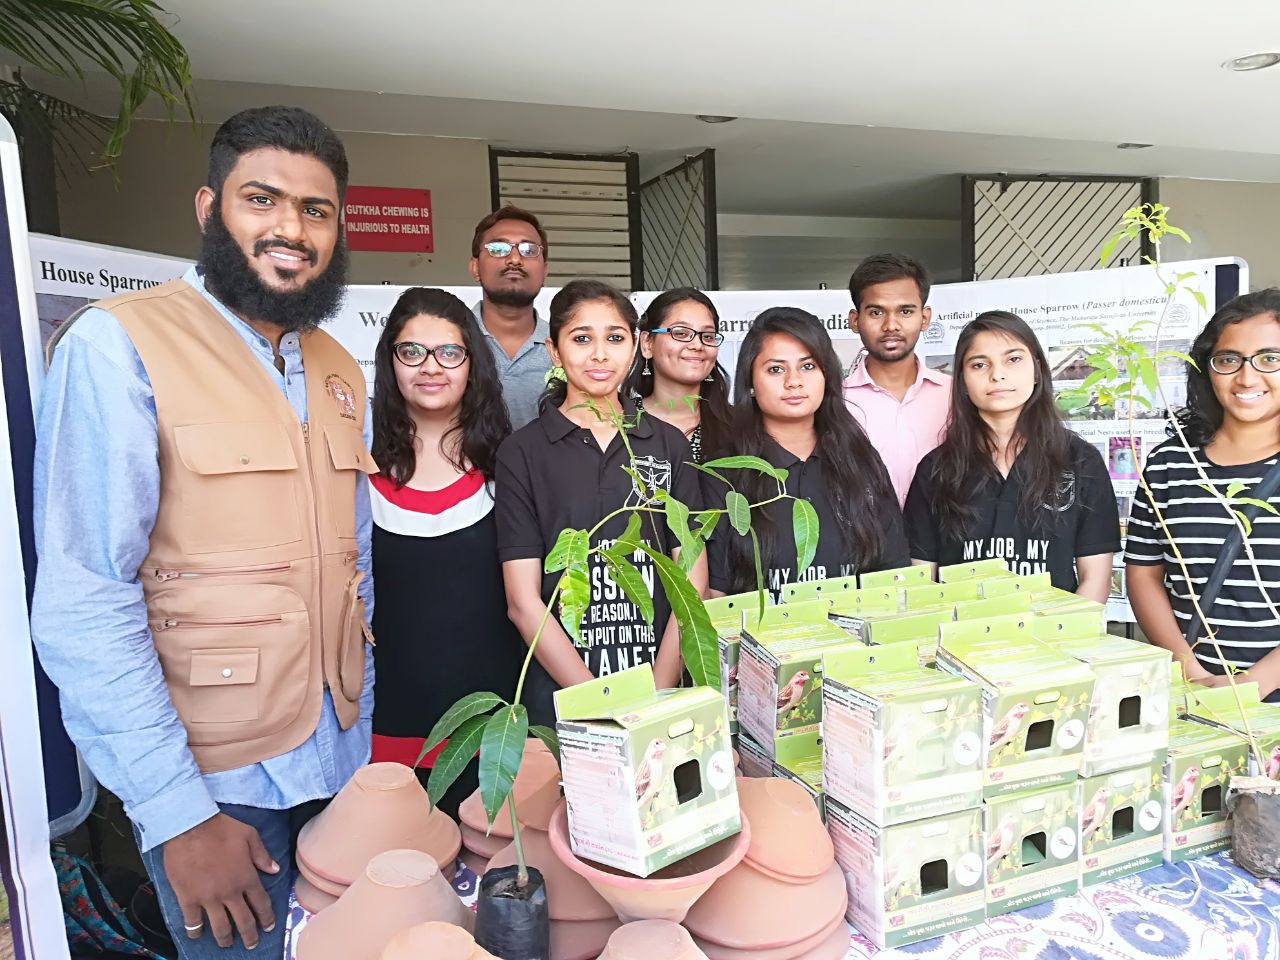 Students of Science faculty celebrated World Sparrow Day